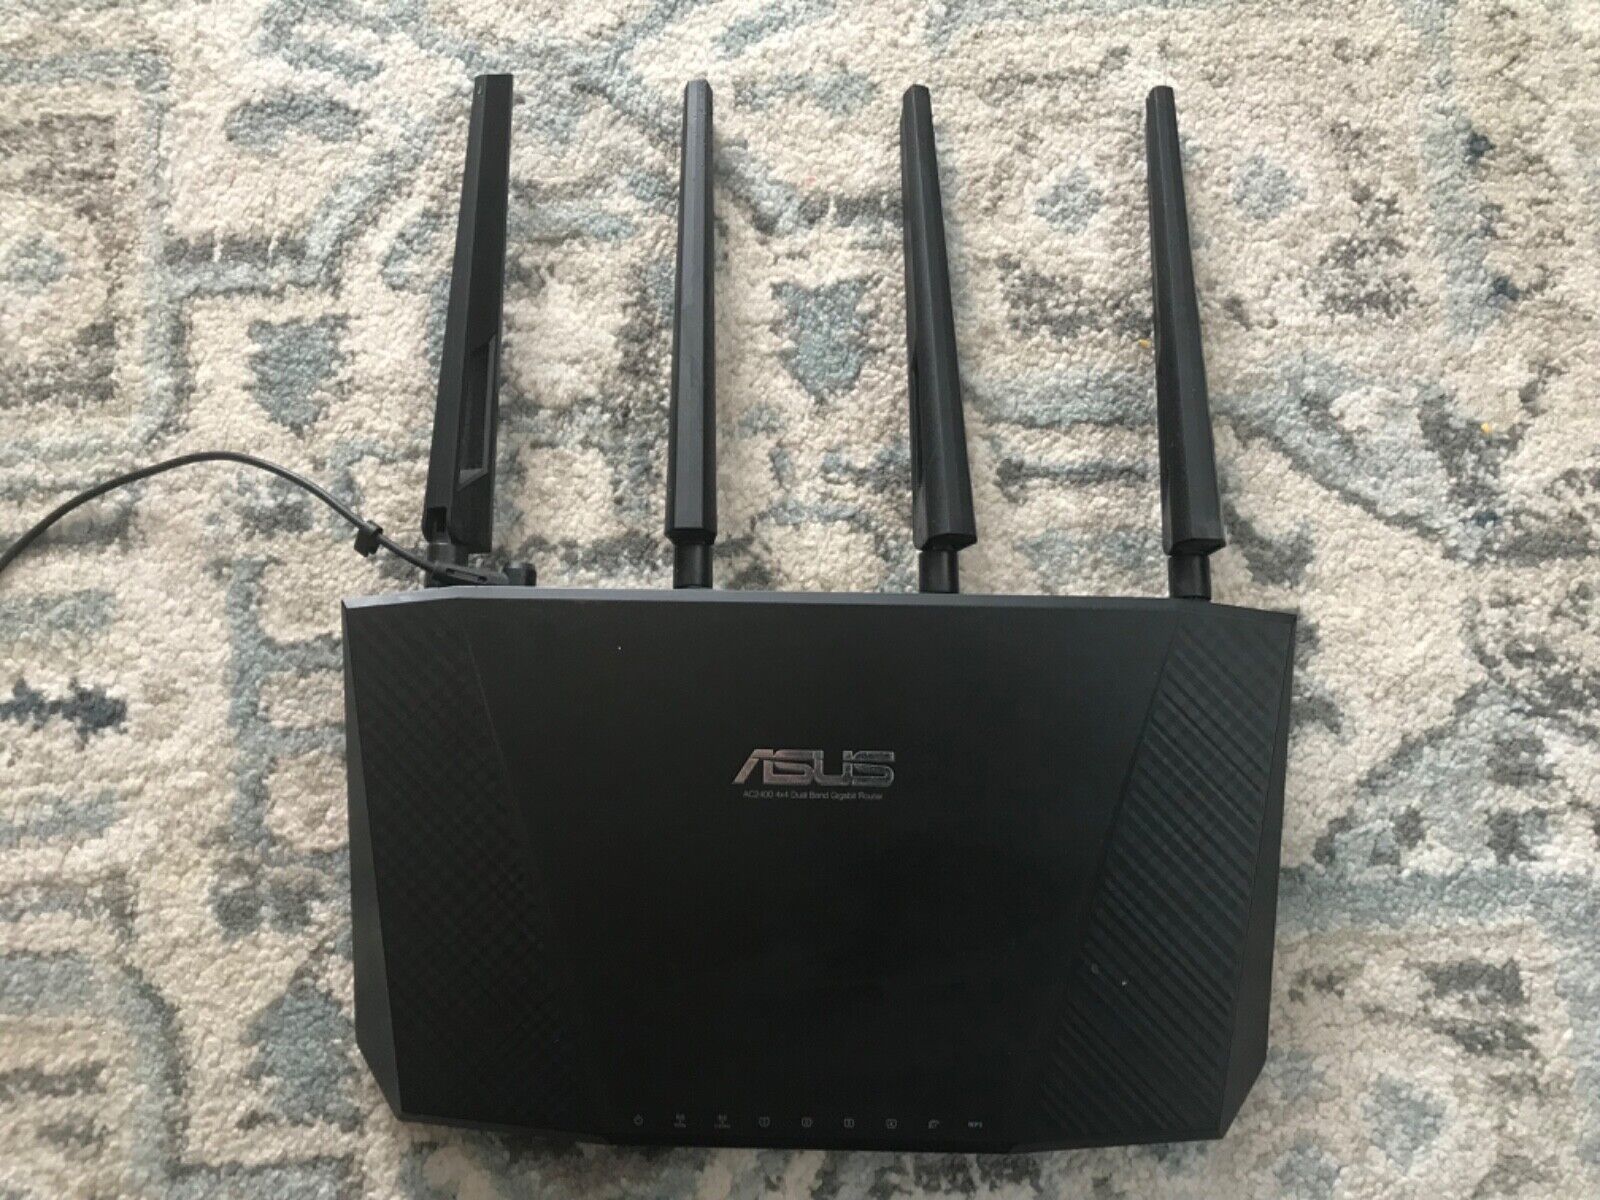 ASUS AC2400 RT-AC87R 4 x 4 Dual-Band Wireless Gigabit ROUTER